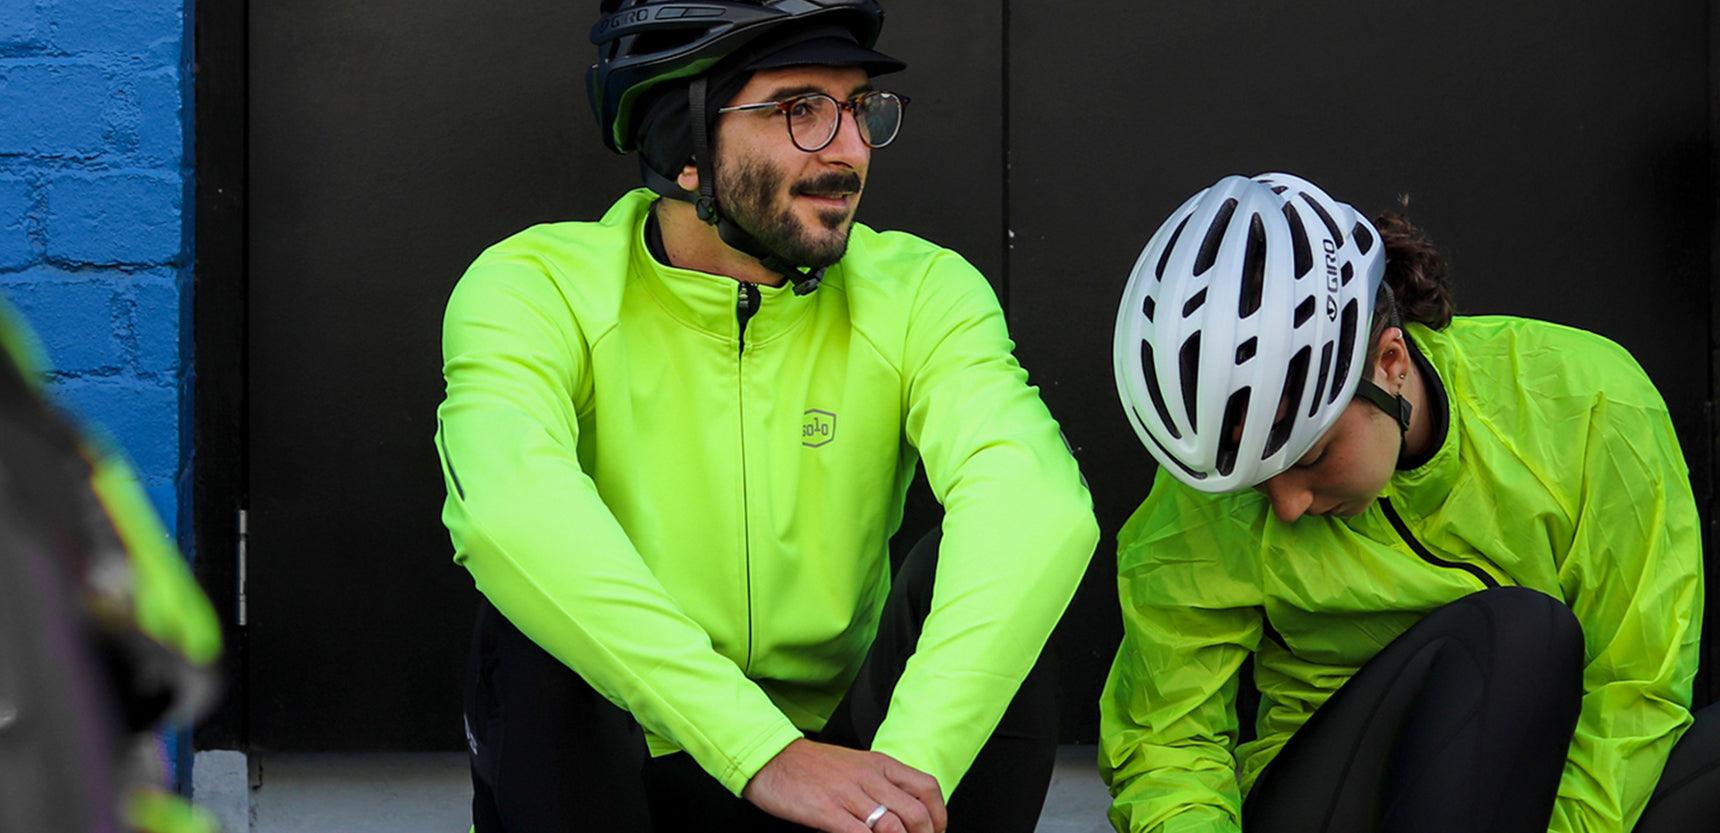 Cycling Jackets - BBB, Bellwether, Fox, Azur Performance